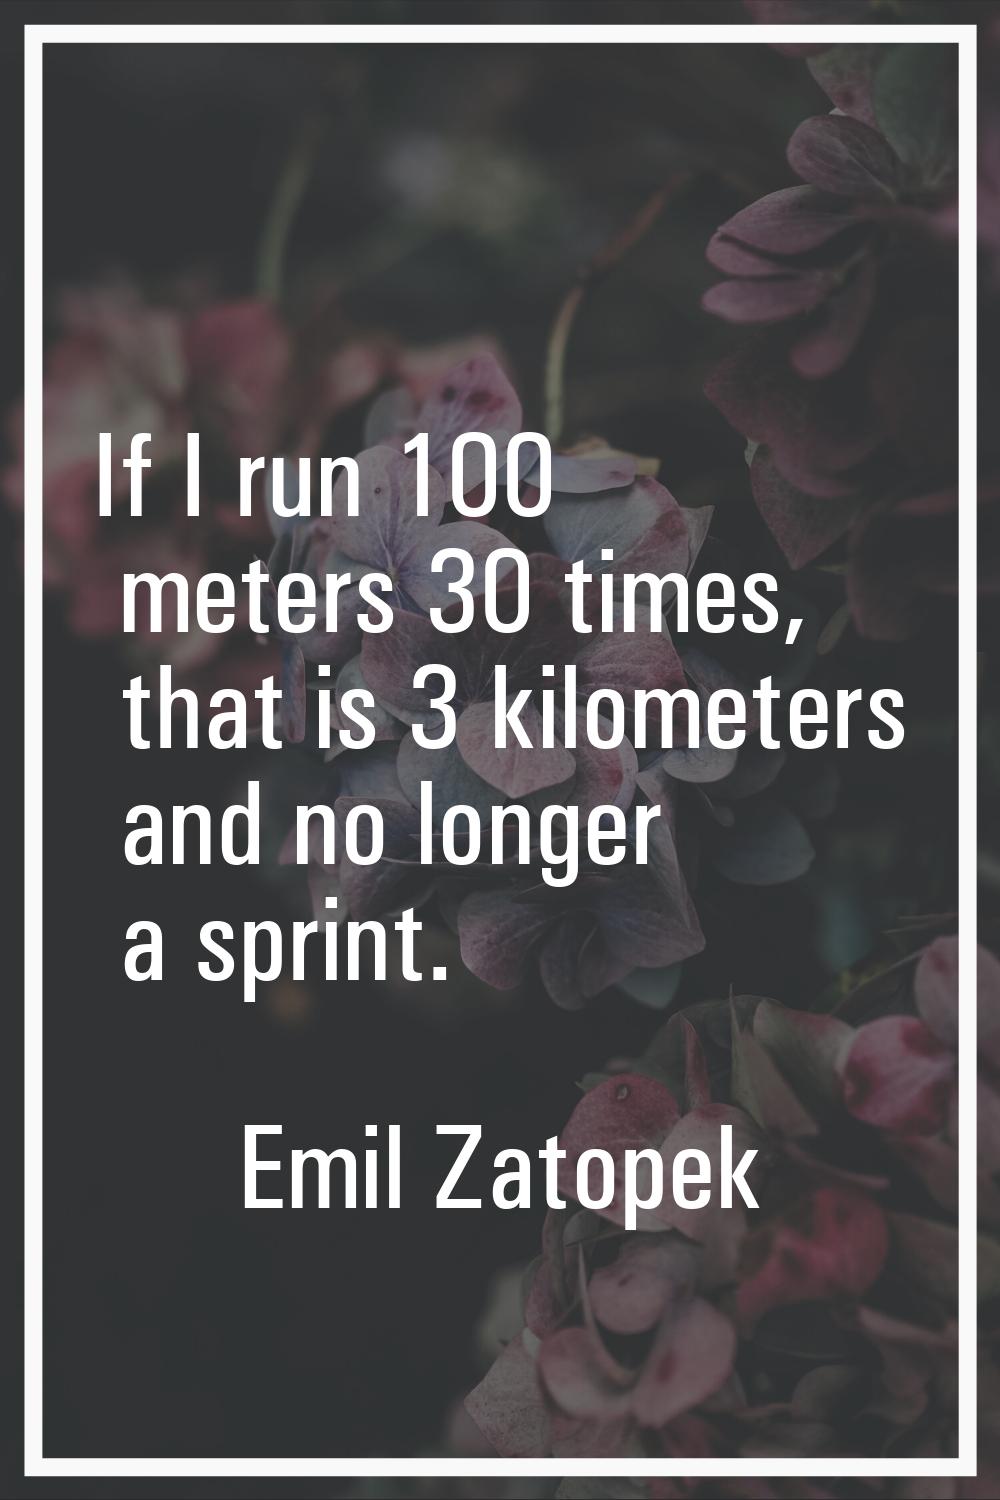 If I run 100 meters 30 times, that is 3 kilometers and no longer a sprint.